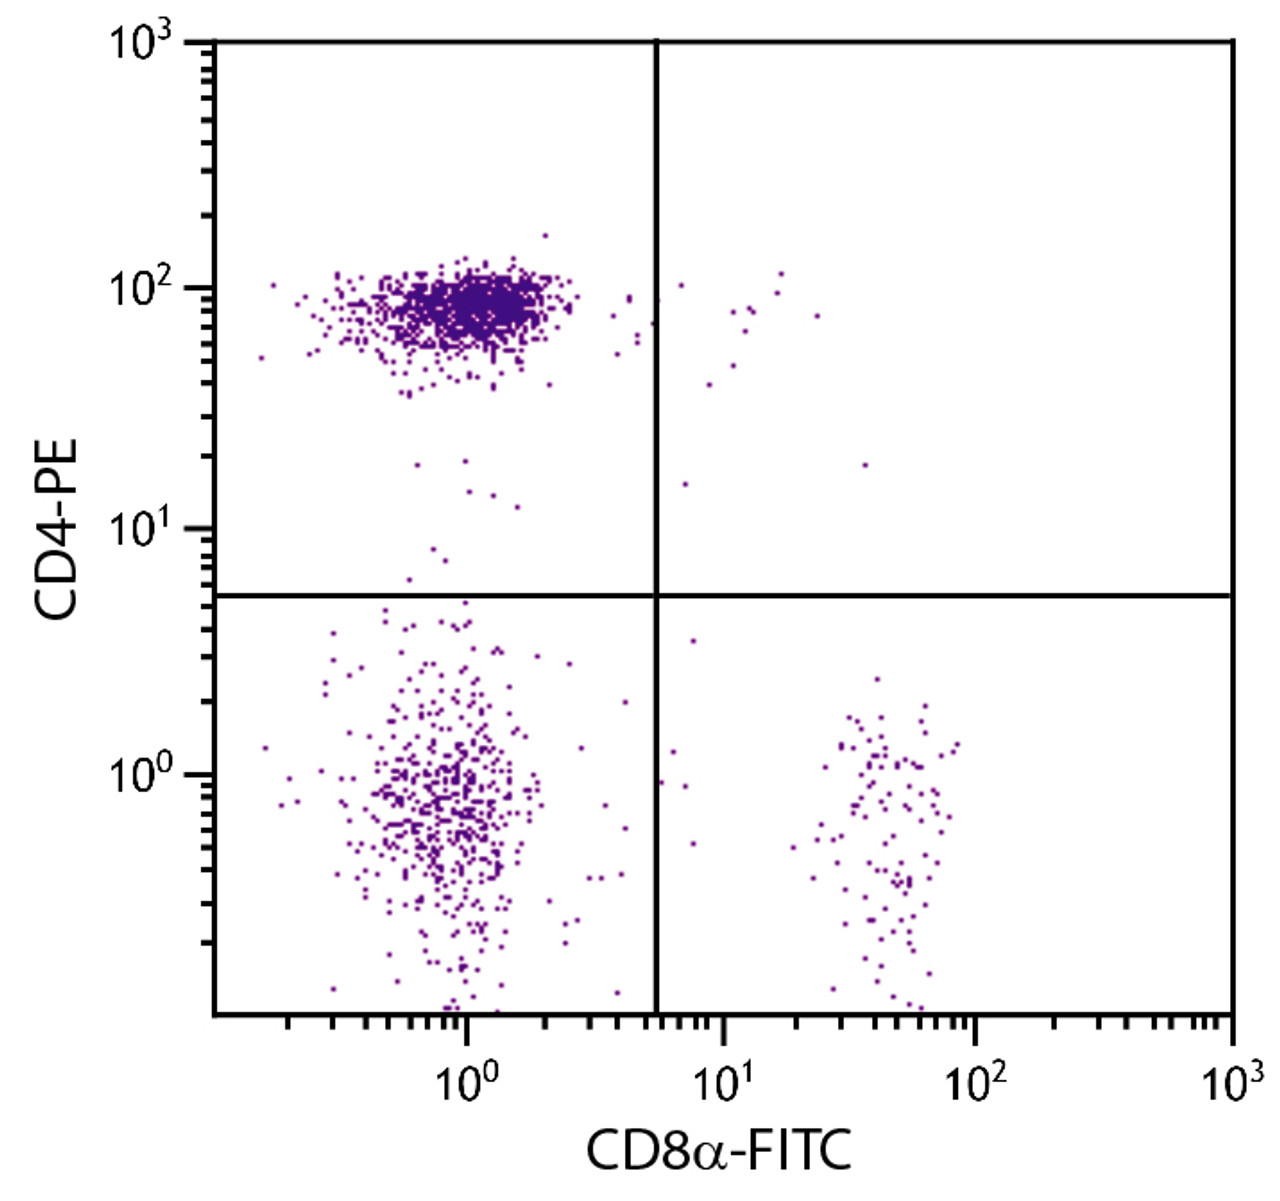 Chicken peripheral blood mononuclear cells were stained with Mouse Anti-Chicken CD8?-FITC (Cat. No. 99-213) and Mouse Anti-Chicken CD4-PE .